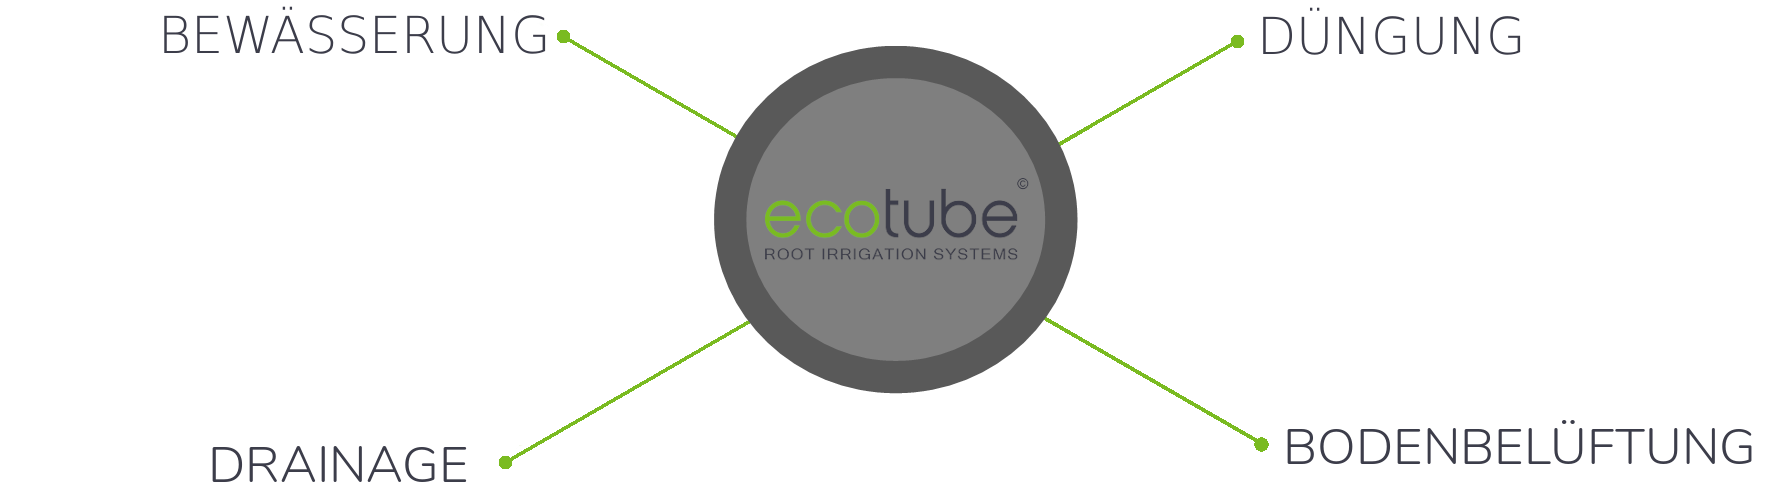 ecotube features